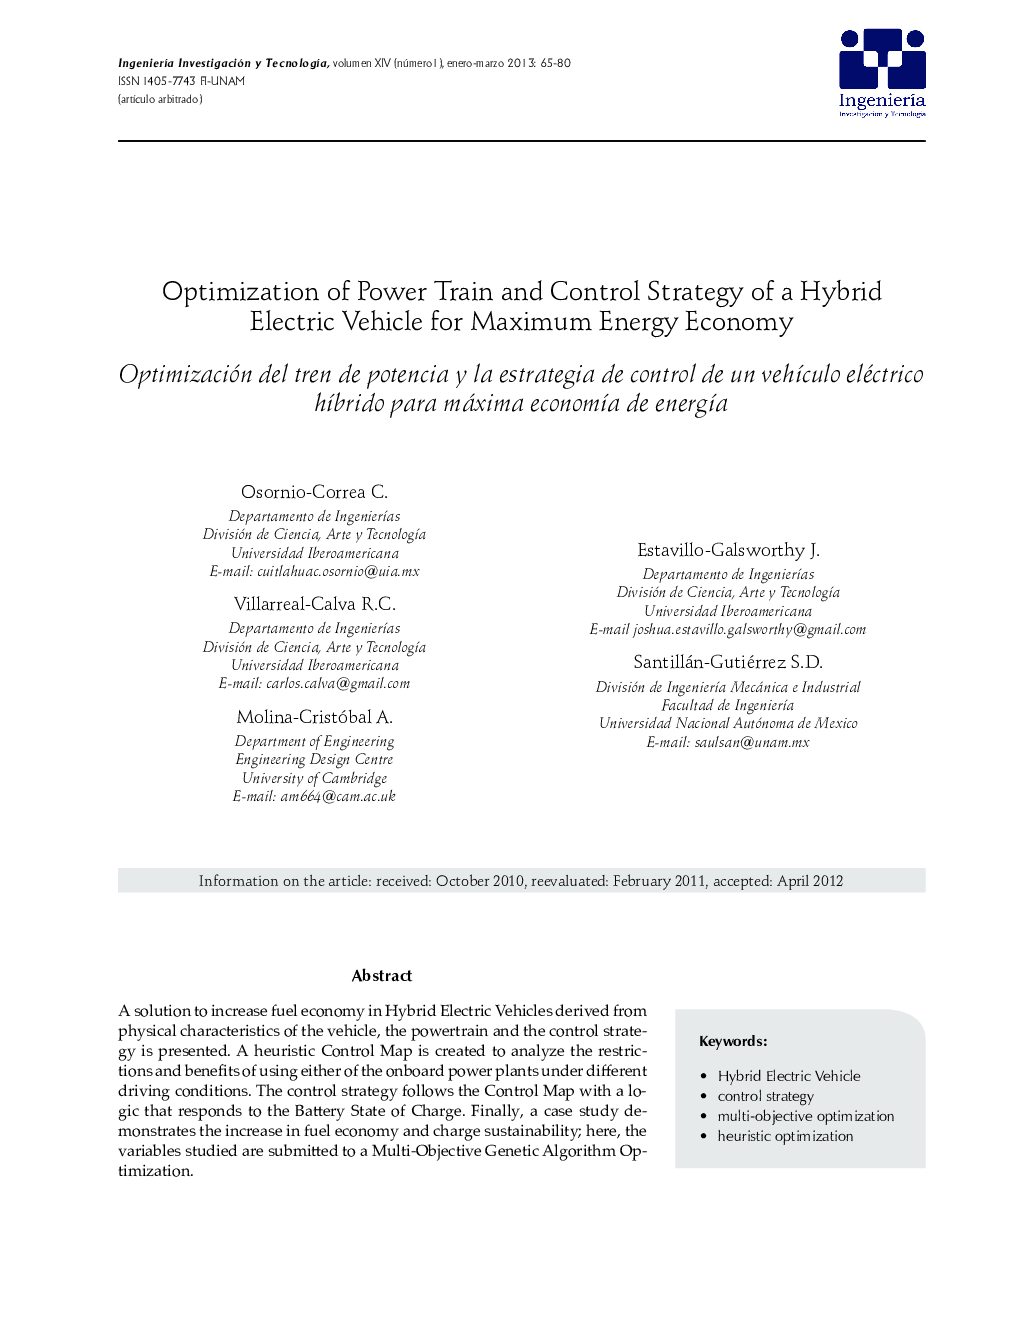 Optimization of Power Train and Control Strategy of a Hybrid Electric Vehicle for Maximum Energy Economy *